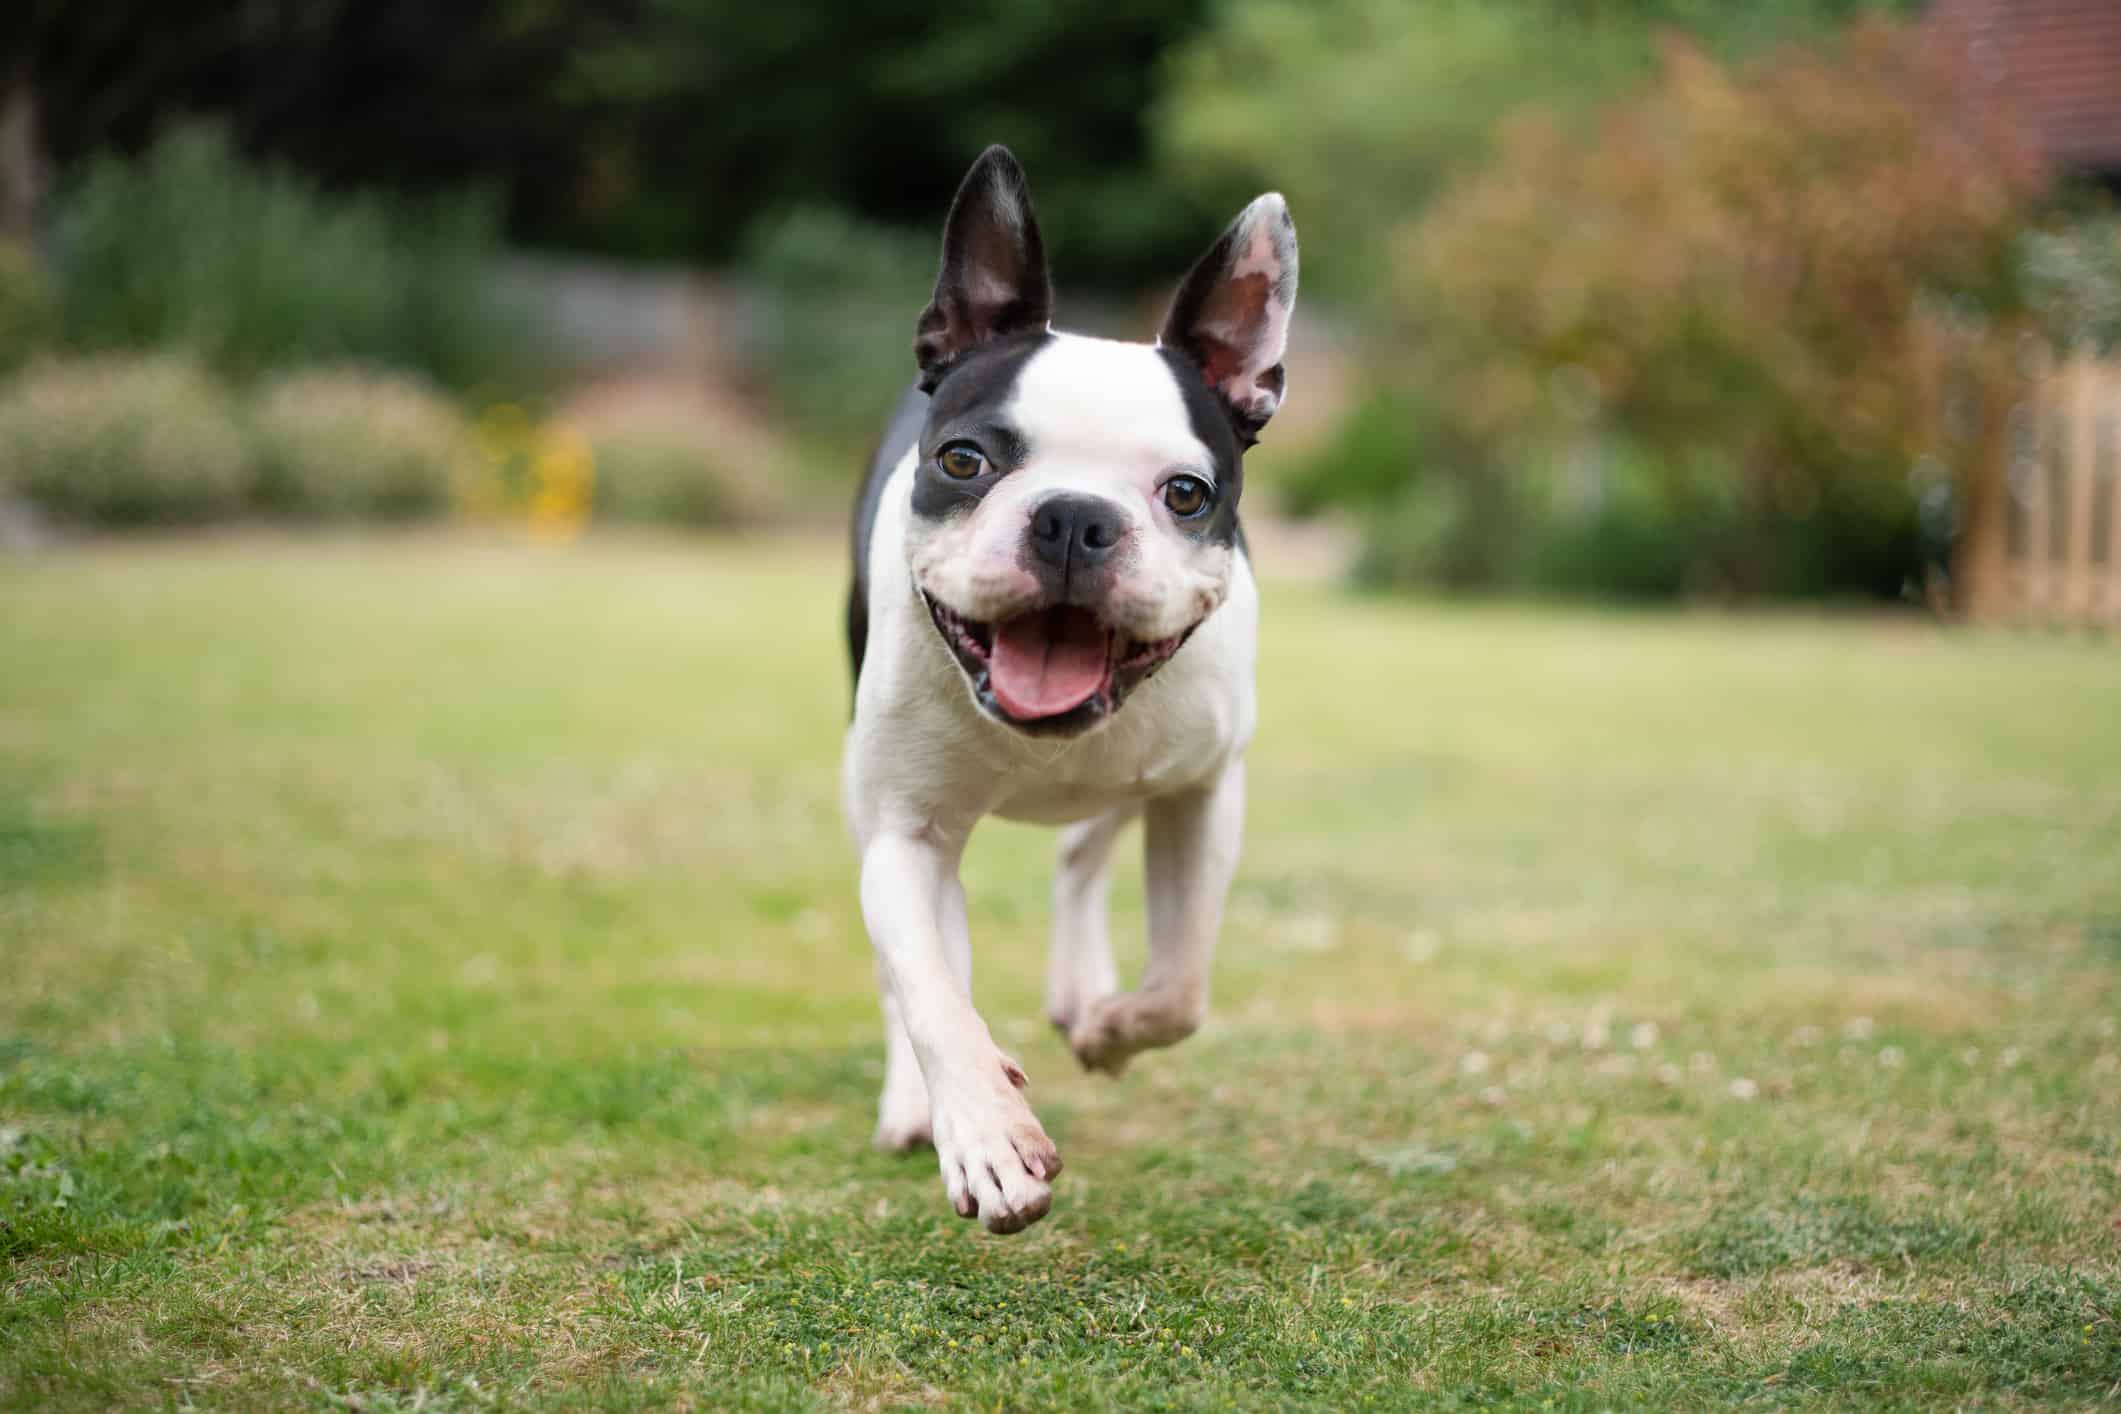 Boston Terrier dog running in a garden towards the camera at eye level. Shallow focus on her eyes. She looks very happy.